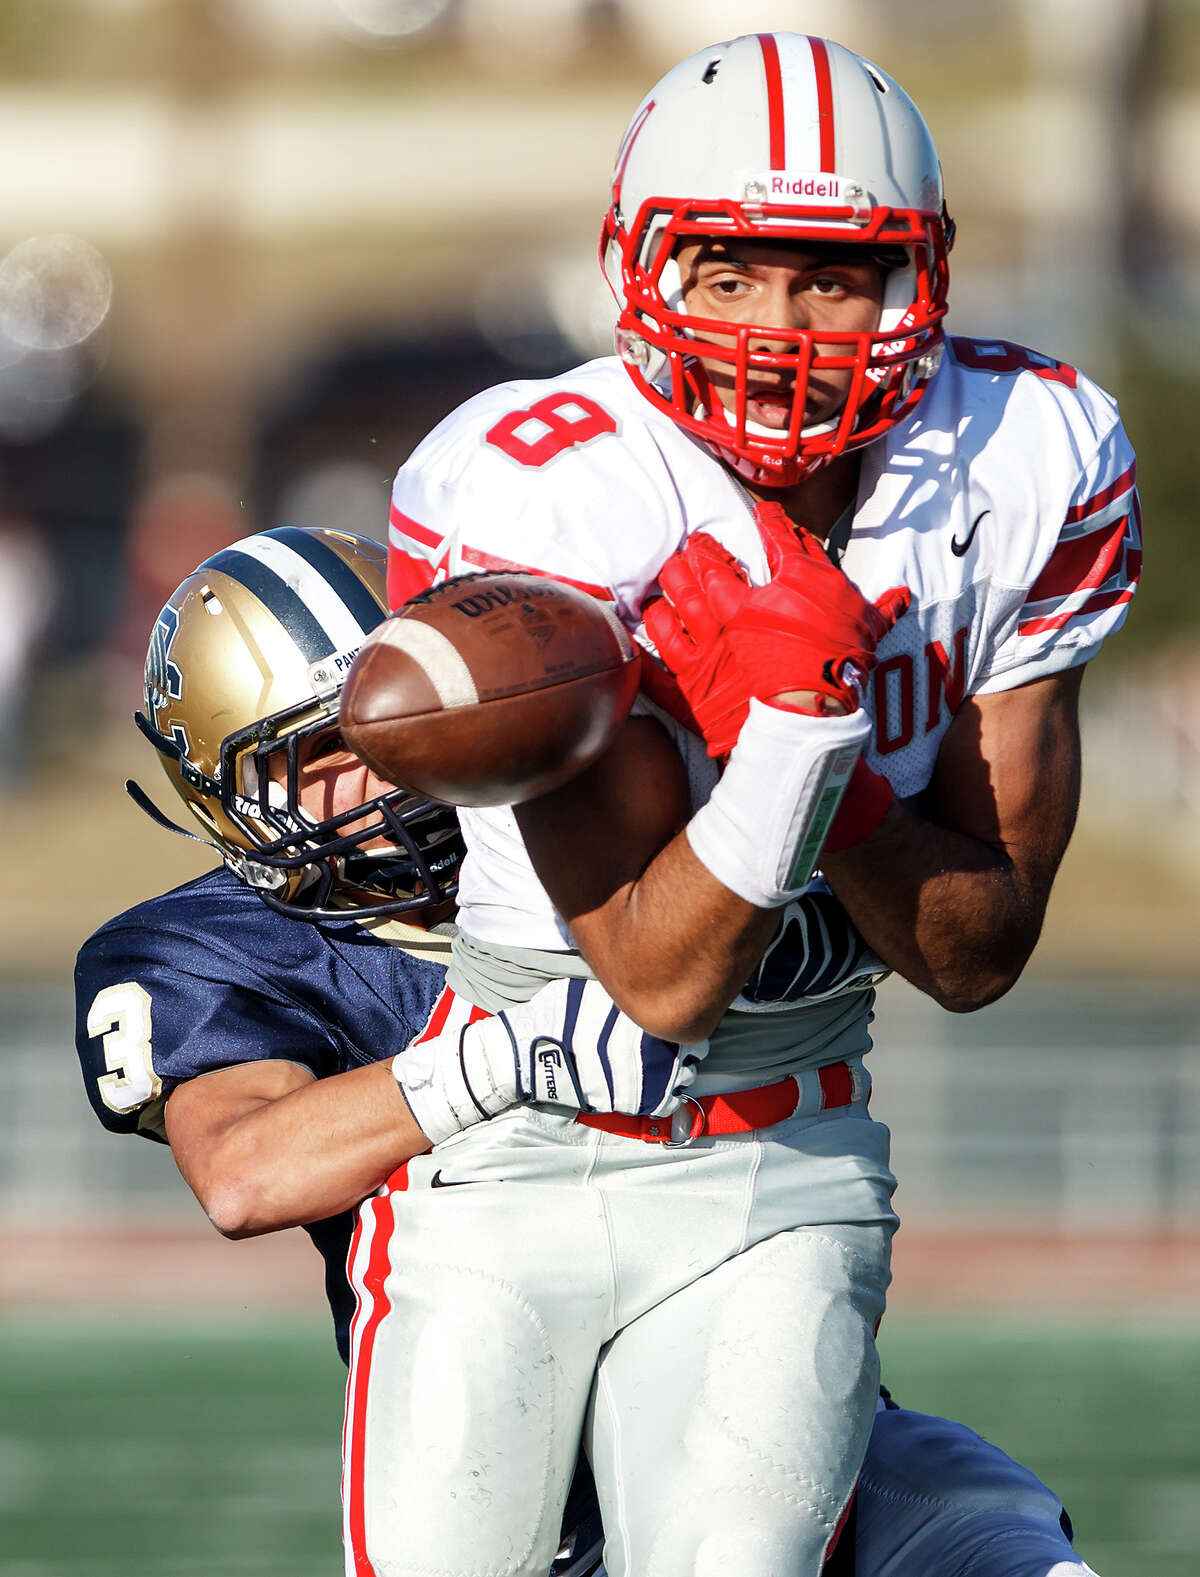 O'Connor's Eddie Vasquez wraps up Judson's Jermaine Adams, preventing him from catching the ball and ending the Rockets' final scoring change during the final minute of their Class 5A Division II second round playoff game at Comalander Stadium on Nov. 24, 2012. O'Connor held on to come away with a 34-28 victory over the Rockets. MARVIN PFEIFFER/ mpfeiffer@express-news.net